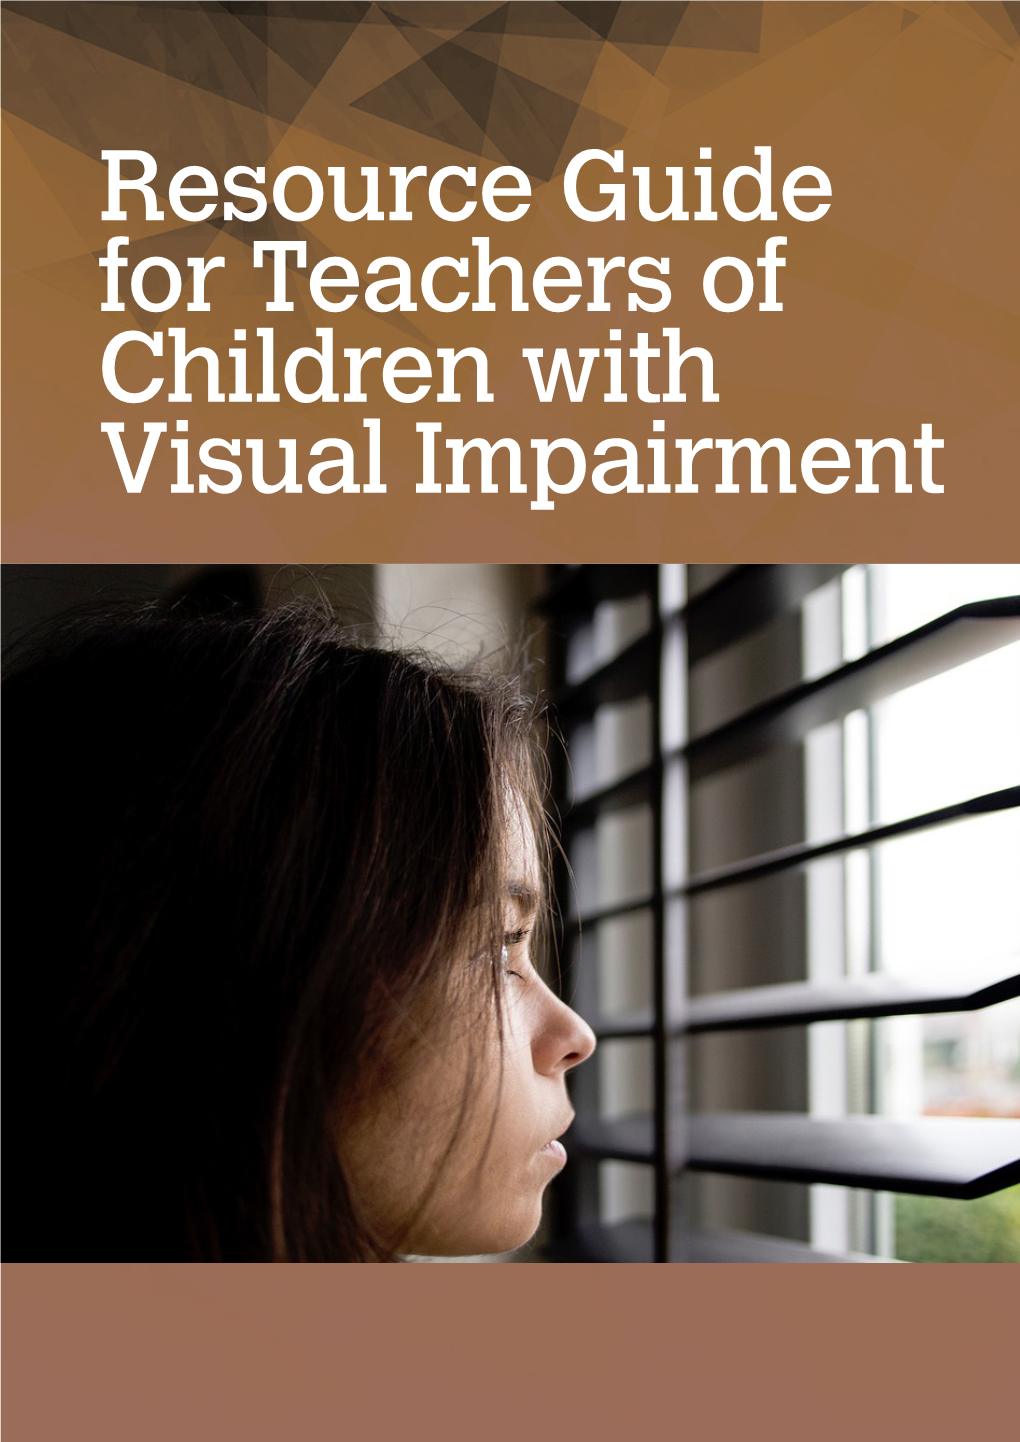 Resource Guide for Teachers of Children with Visual Impairment